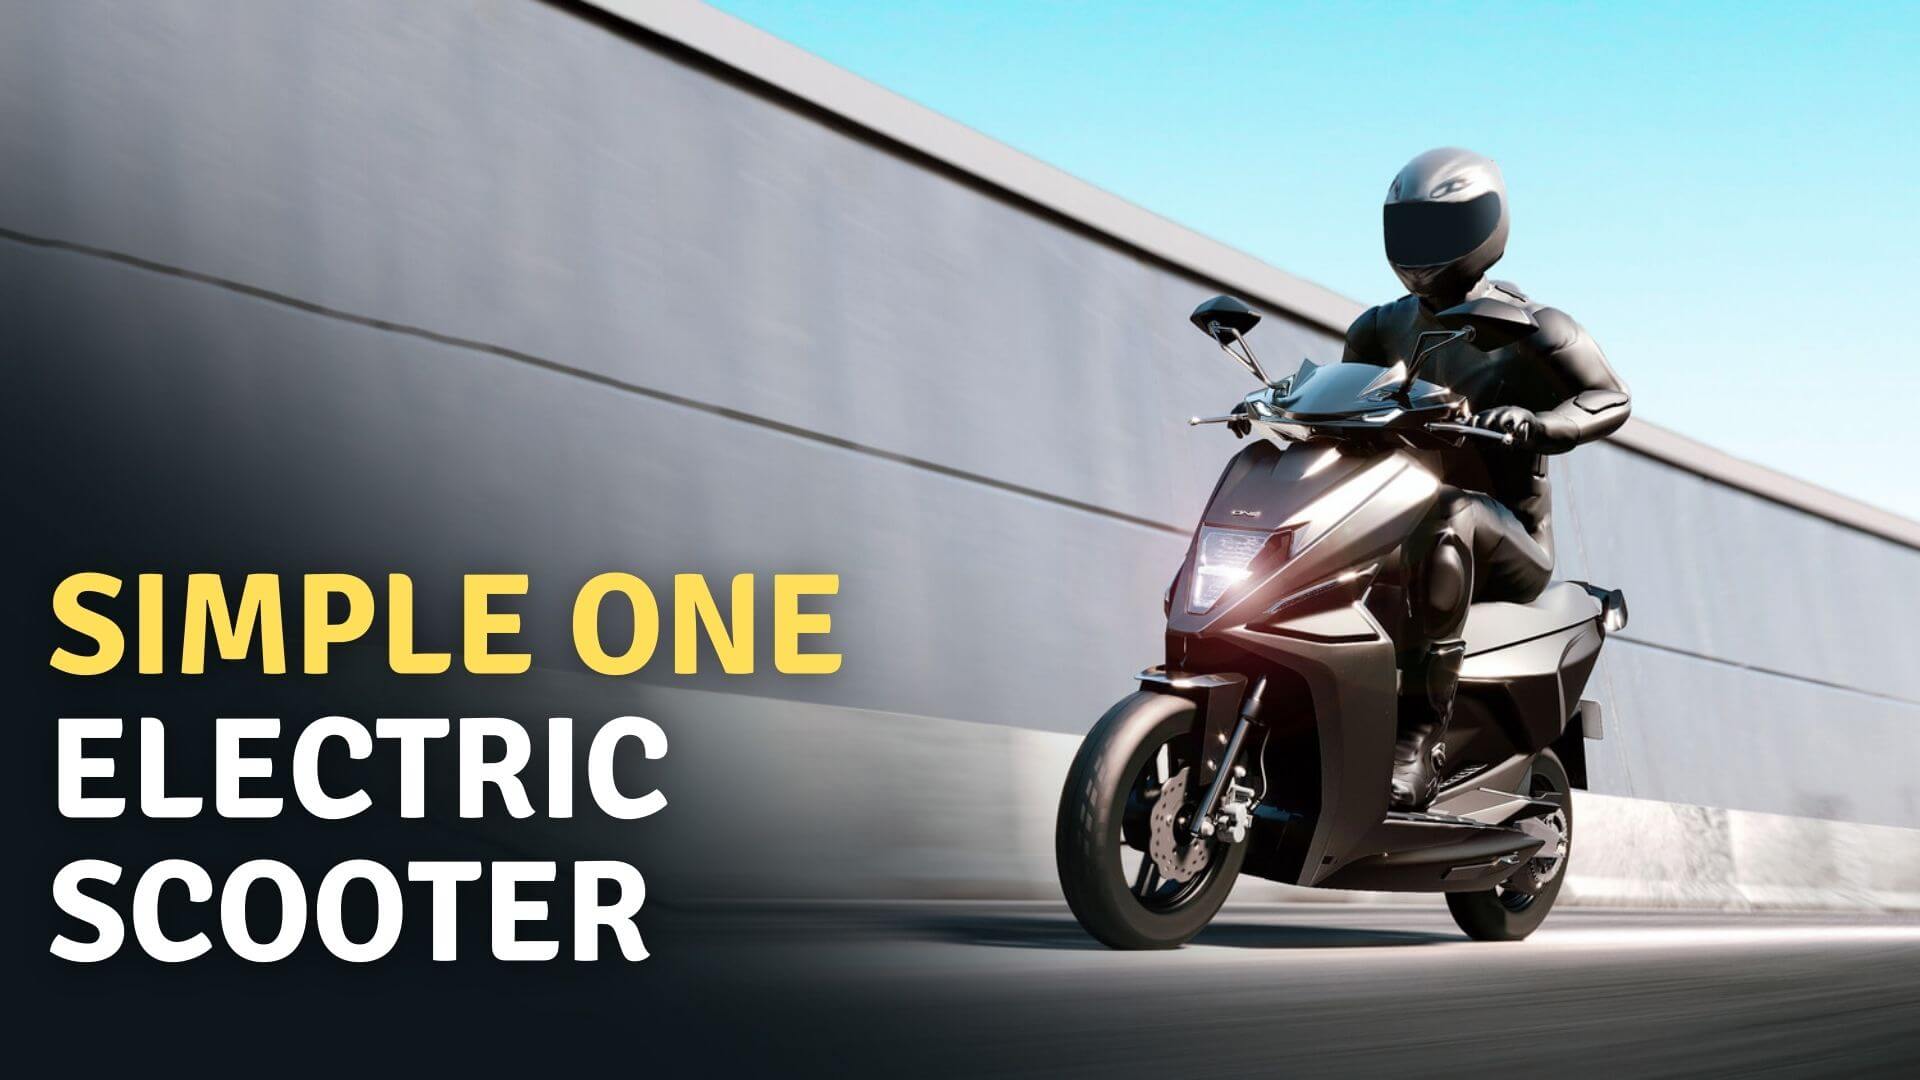 https://e-vehicleinfo.com/simple-one-electric-scooter-price-range-and-top-speed/